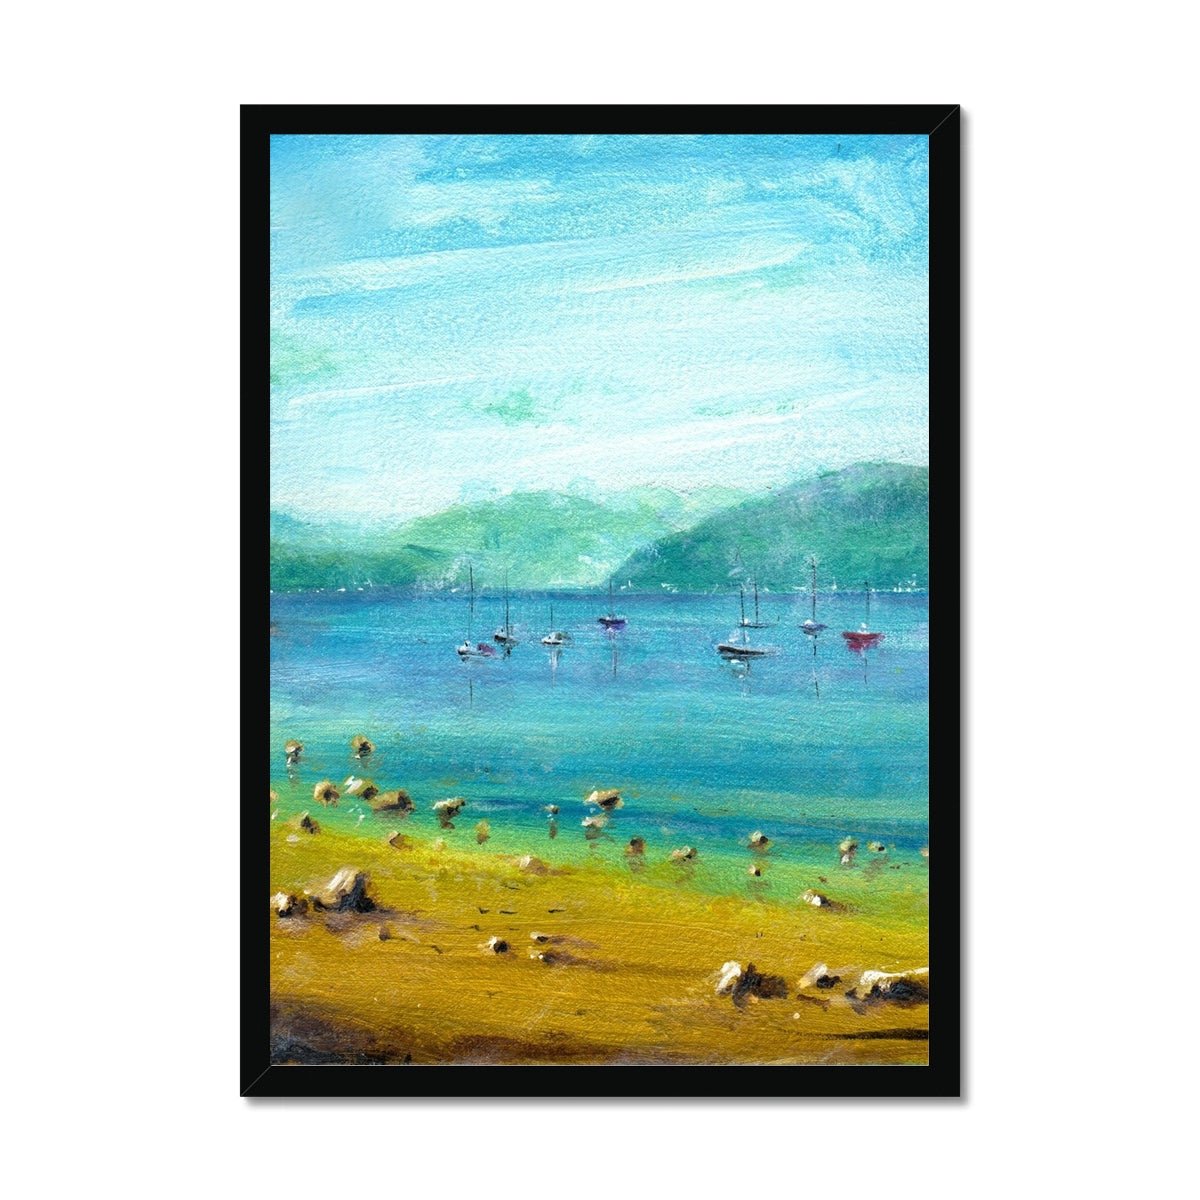 A Summer Day On The Clyde Painting | Framed Prints From Scotland-Framed Prints-River Clyde Art Gallery-A2 Portrait-Black Frame-Paintings, Prints, Homeware, Art Gifts From Scotland By Scottish Artist Kevin Hunter